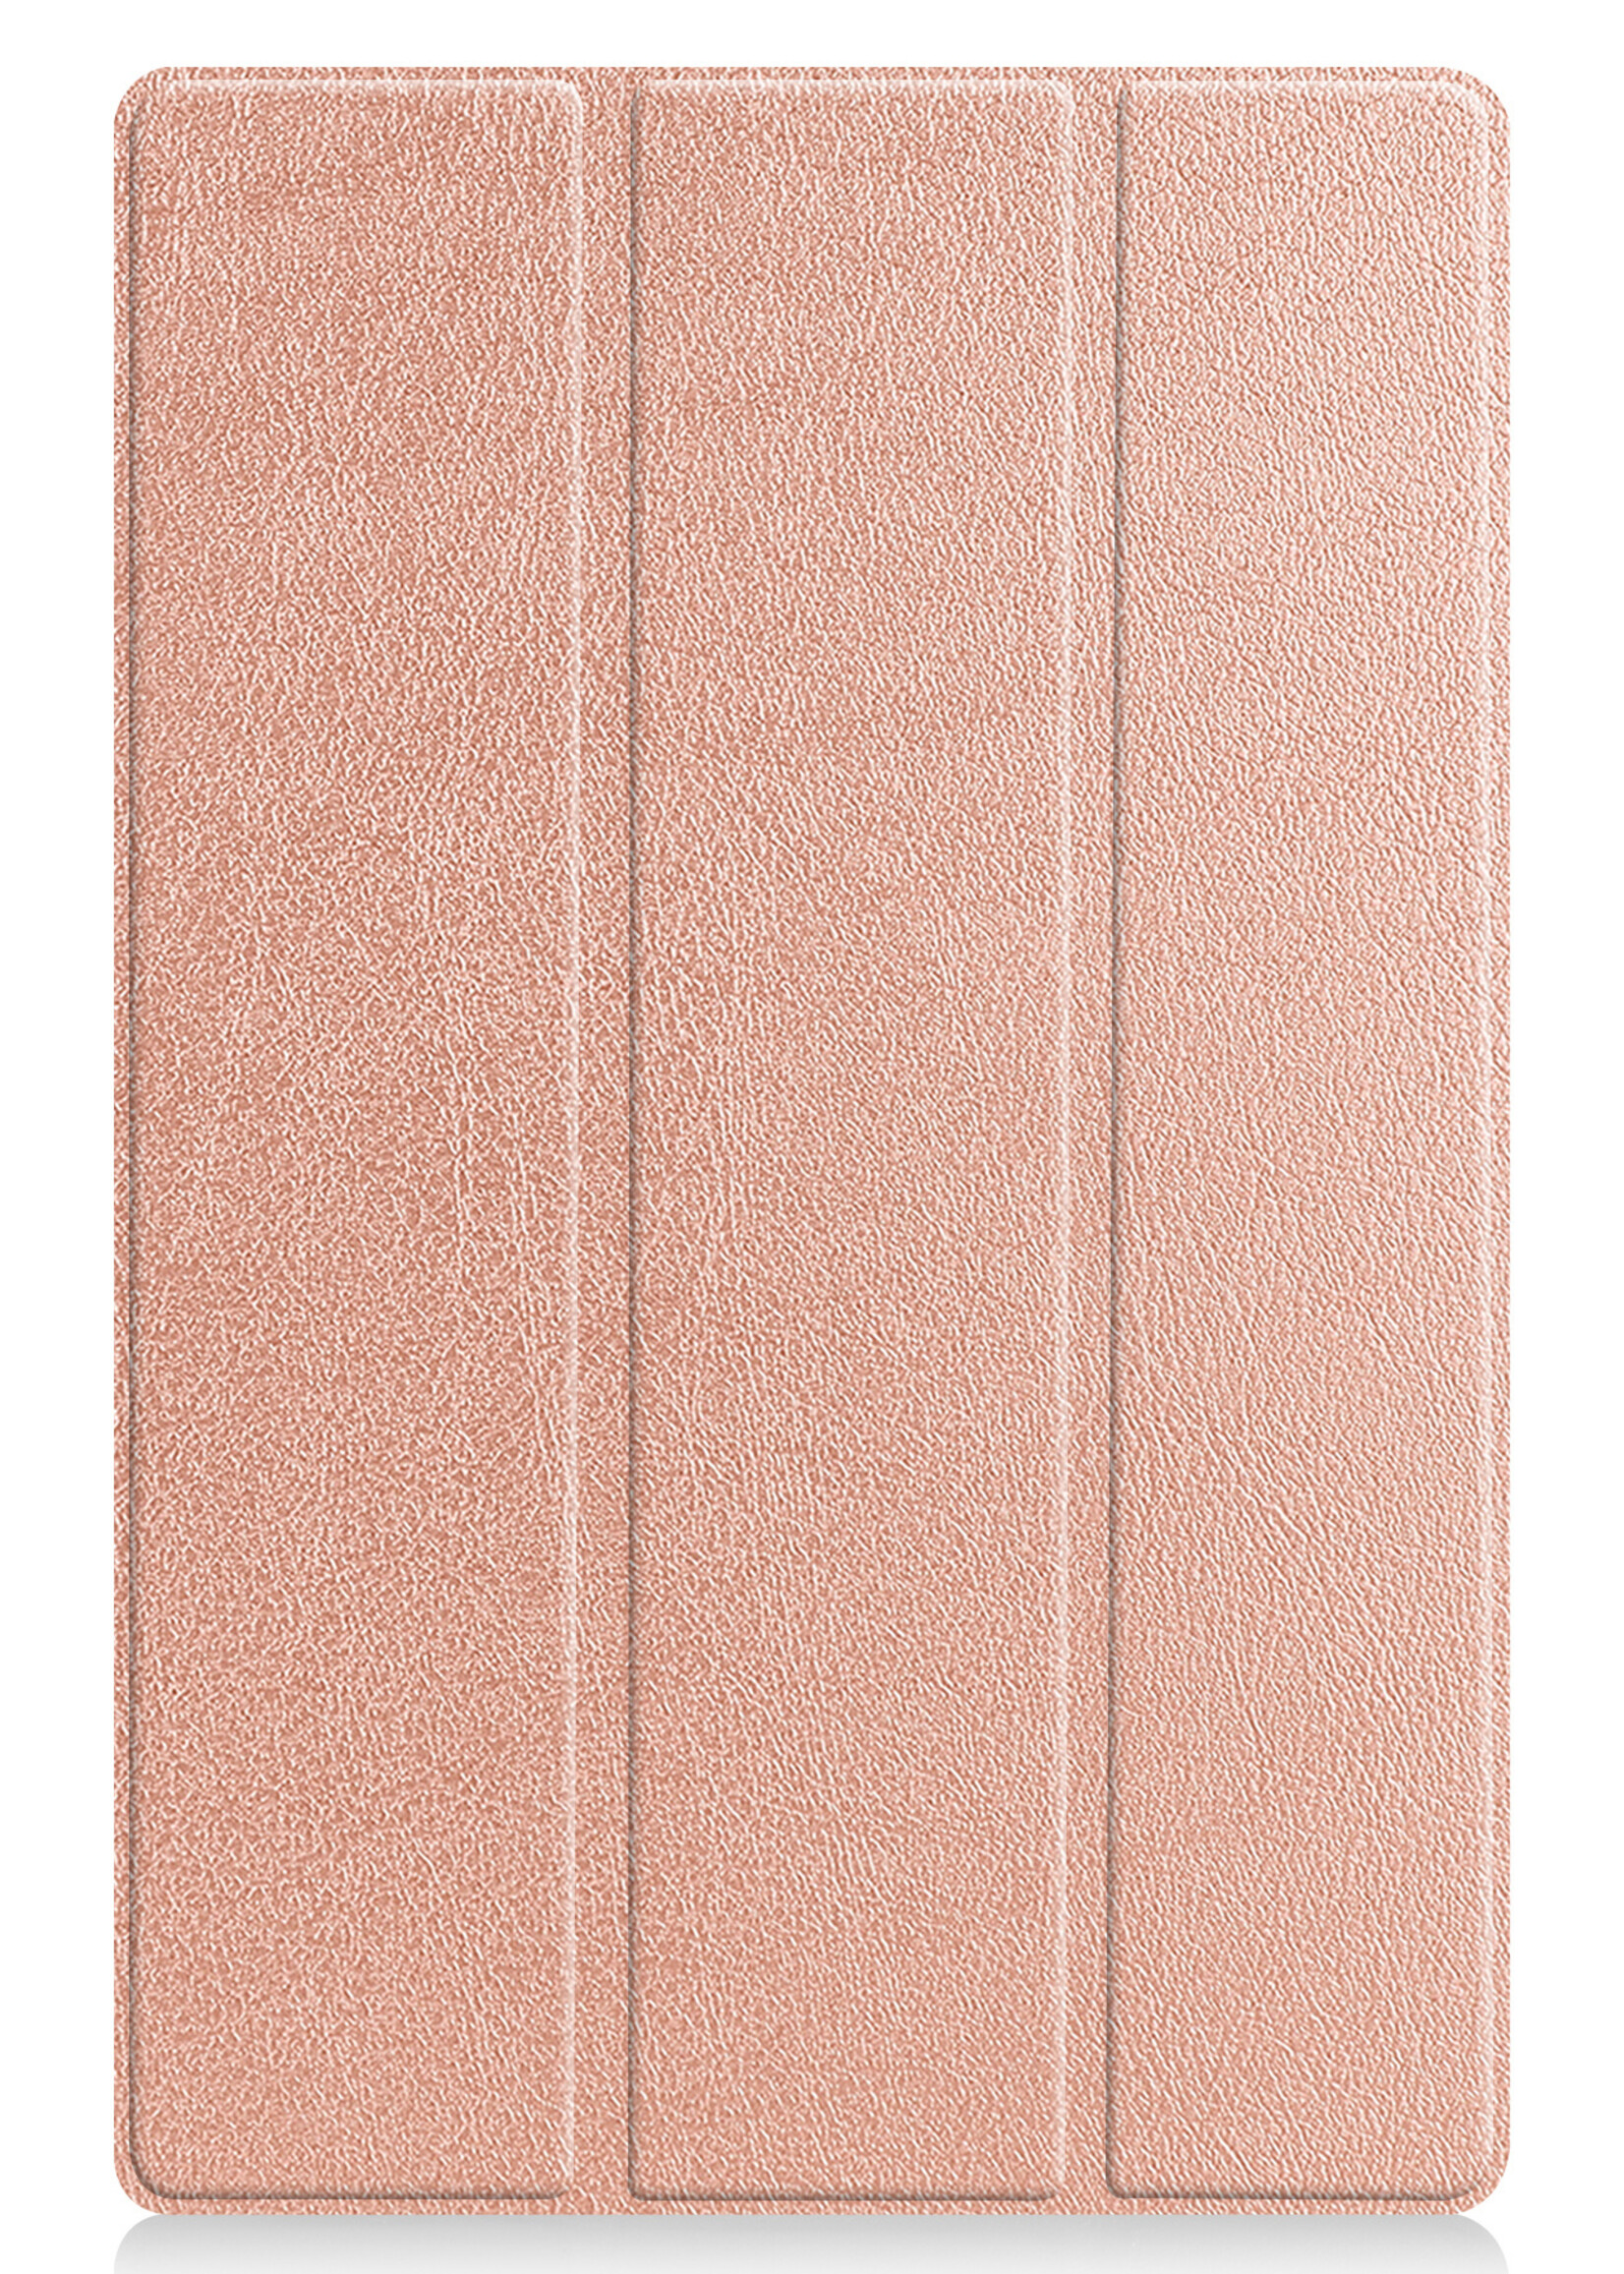 BTH Lenovo Tab P11 Hoes Luxe Book Case Hoesje - Lenovo Tab P11 Hoes Cover (11 inch) - Rose Goud